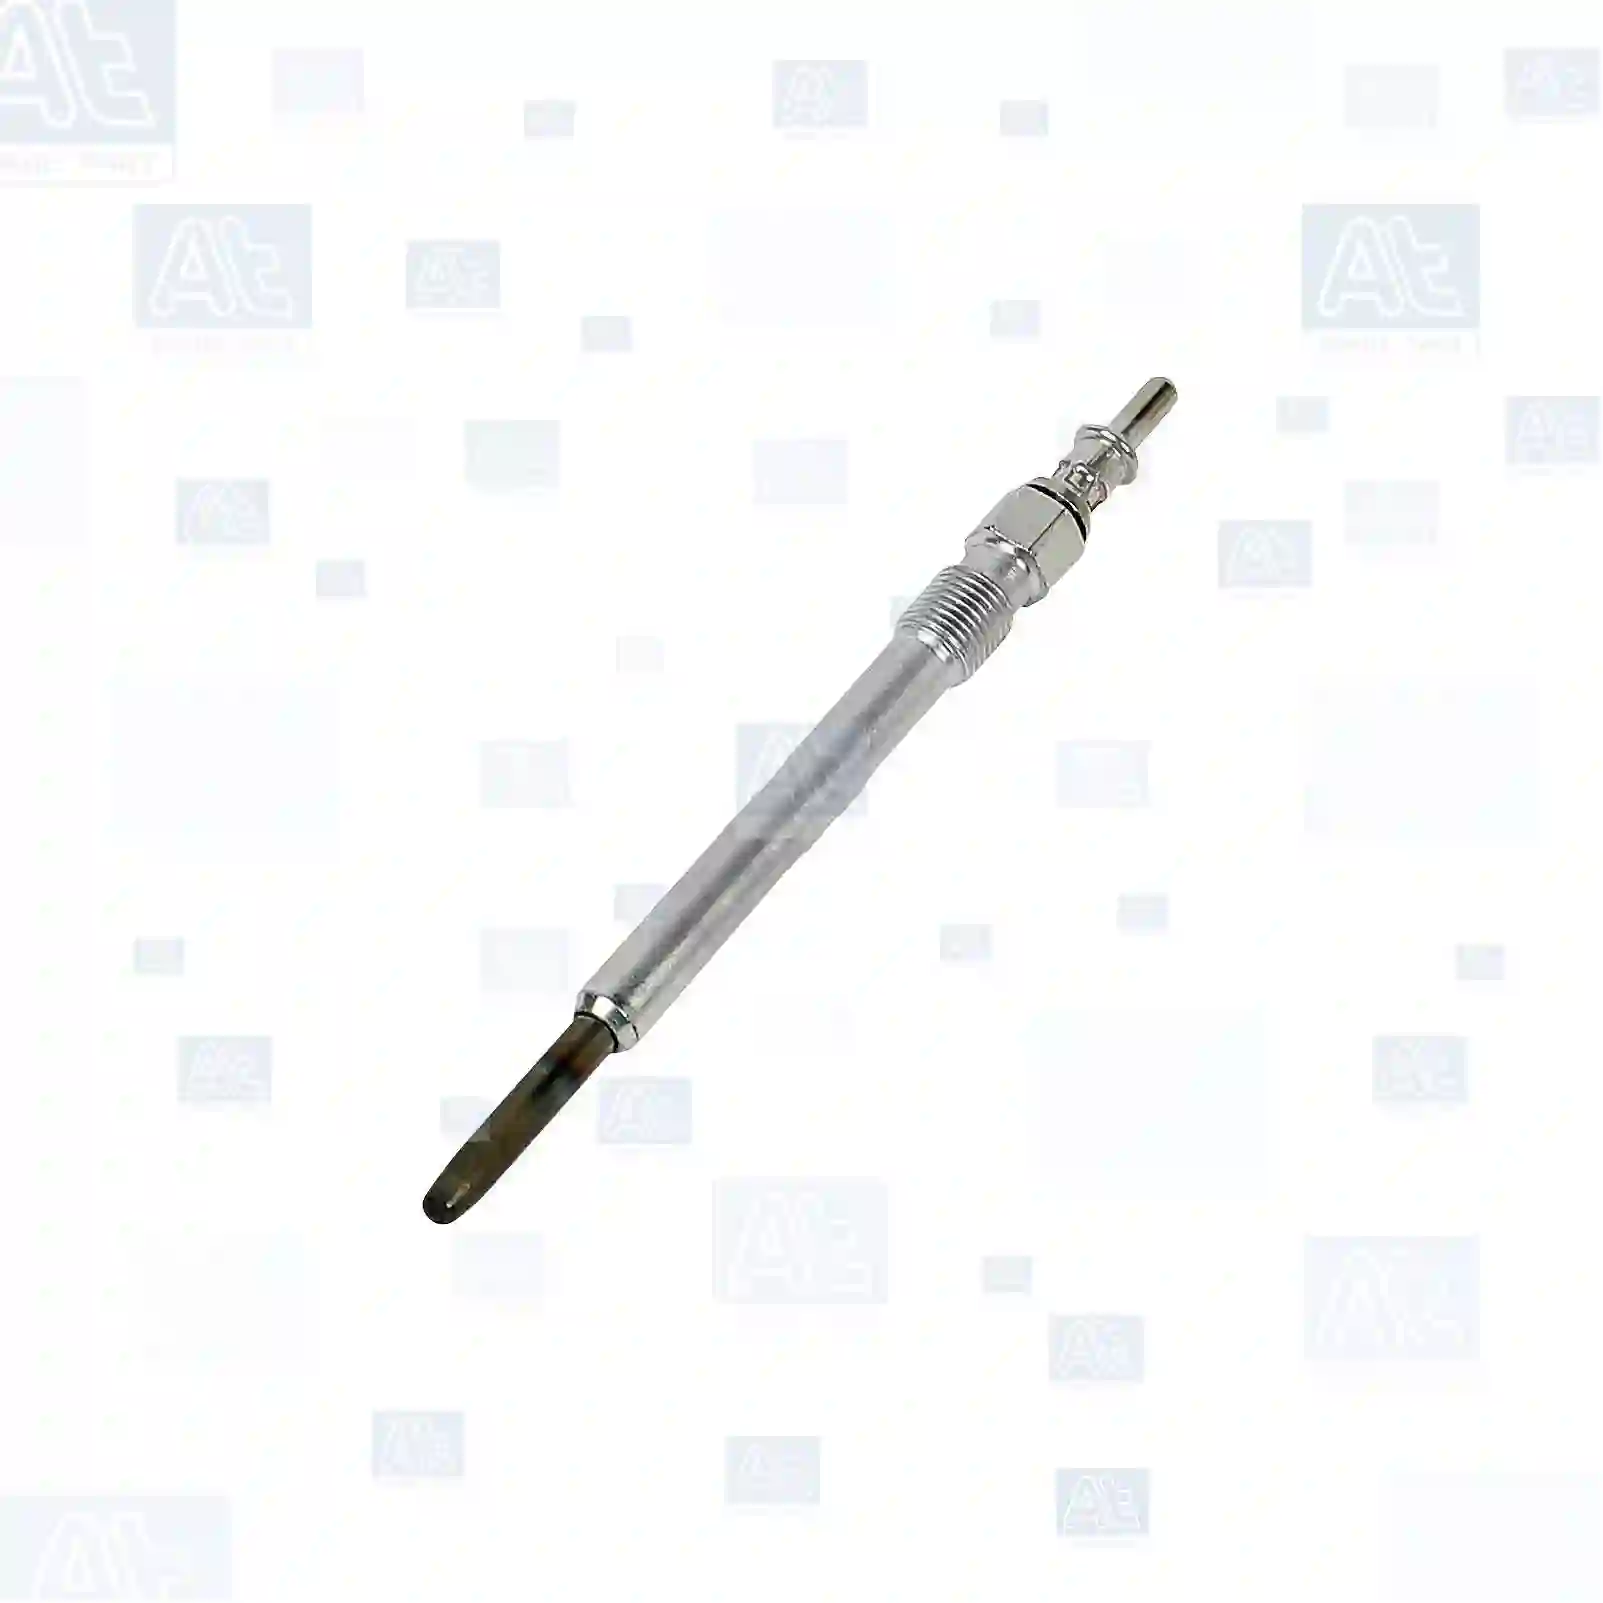 Glow plug, 77700618, 5058011AD, 5080046AA, 5080047AA, 5080047AB, 5117592AA, 71775530, 59621Q, 5080047AA, 5080047AB, 5117592AA, 71775602, 88900715, 5080046AA, 5080047AA, 5080047AB, 5117592AA, 0001592801, 0001593701, 0001593801, 0001594201, 0001594801, 0001594901, 0011592001, 0011592801, 0011593701, 0011593801, 0011594201, 0011594801, 0011594901, 59621Q ||  77700618 At Spare Part | Engine, Accelerator Pedal, Camshaft, Connecting Rod, Crankcase, Crankshaft, Cylinder Head, Engine Suspension Mountings, Exhaust Manifold, Exhaust Gas Recirculation, Filter Kits, Flywheel Housing, General Overhaul Kits, Engine, Intake Manifold, Oil Cleaner, Oil Cooler, Oil Filter, Oil Pump, Oil Sump, Piston & Liner, Sensor & Switch, Timing Case, Turbocharger, Cooling System, Belt Tensioner, Coolant Filter, Coolant Pipe, Corrosion Prevention Agent, Drive, Expansion Tank, Fan, Intercooler, Monitors & Gauges, Radiator, Thermostat, V-Belt / Timing belt, Water Pump, Fuel System, Electronical Injector Unit, Feed Pump, Fuel Filter, cpl., Fuel Gauge Sender,  Fuel Line, Fuel Pump, Fuel Tank, Injection Line Kit, Injection Pump, Exhaust System, Clutch & Pedal, Gearbox, Propeller Shaft, Axles, Brake System, Hubs & Wheels, Suspension, Leaf Spring, Universal Parts / Accessories, Steering, Electrical System, Cabin Glow plug, 77700618, 5058011AD, 5080046AA, 5080047AA, 5080047AB, 5117592AA, 71775530, 59621Q, 5080047AA, 5080047AB, 5117592AA, 71775602, 88900715, 5080046AA, 5080047AA, 5080047AB, 5117592AA, 0001592801, 0001593701, 0001593801, 0001594201, 0001594801, 0001594901, 0011592001, 0011592801, 0011593701, 0011593801, 0011594201, 0011594801, 0011594901, 59621Q ||  77700618 At Spare Part | Engine, Accelerator Pedal, Camshaft, Connecting Rod, Crankcase, Crankshaft, Cylinder Head, Engine Suspension Mountings, Exhaust Manifold, Exhaust Gas Recirculation, Filter Kits, Flywheel Housing, General Overhaul Kits, Engine, Intake Manifold, Oil Cleaner, Oil Cooler, Oil Filter, Oil Pump, Oil Sump, Piston & Liner, Sensor & Switch, Timing Case, Turbocharger, Cooling System, Belt Tensioner, Coolant Filter, Coolant Pipe, Corrosion Prevention Agent, Drive, Expansion Tank, Fan, Intercooler, Monitors & Gauges, Radiator, Thermostat, V-Belt / Timing belt, Water Pump, Fuel System, Electronical Injector Unit, Feed Pump, Fuel Filter, cpl., Fuel Gauge Sender,  Fuel Line, Fuel Pump, Fuel Tank, Injection Line Kit, Injection Pump, Exhaust System, Clutch & Pedal, Gearbox, Propeller Shaft, Axles, Brake System, Hubs & Wheels, Suspension, Leaf Spring, Universal Parts / Accessories, Steering, Electrical System, Cabin